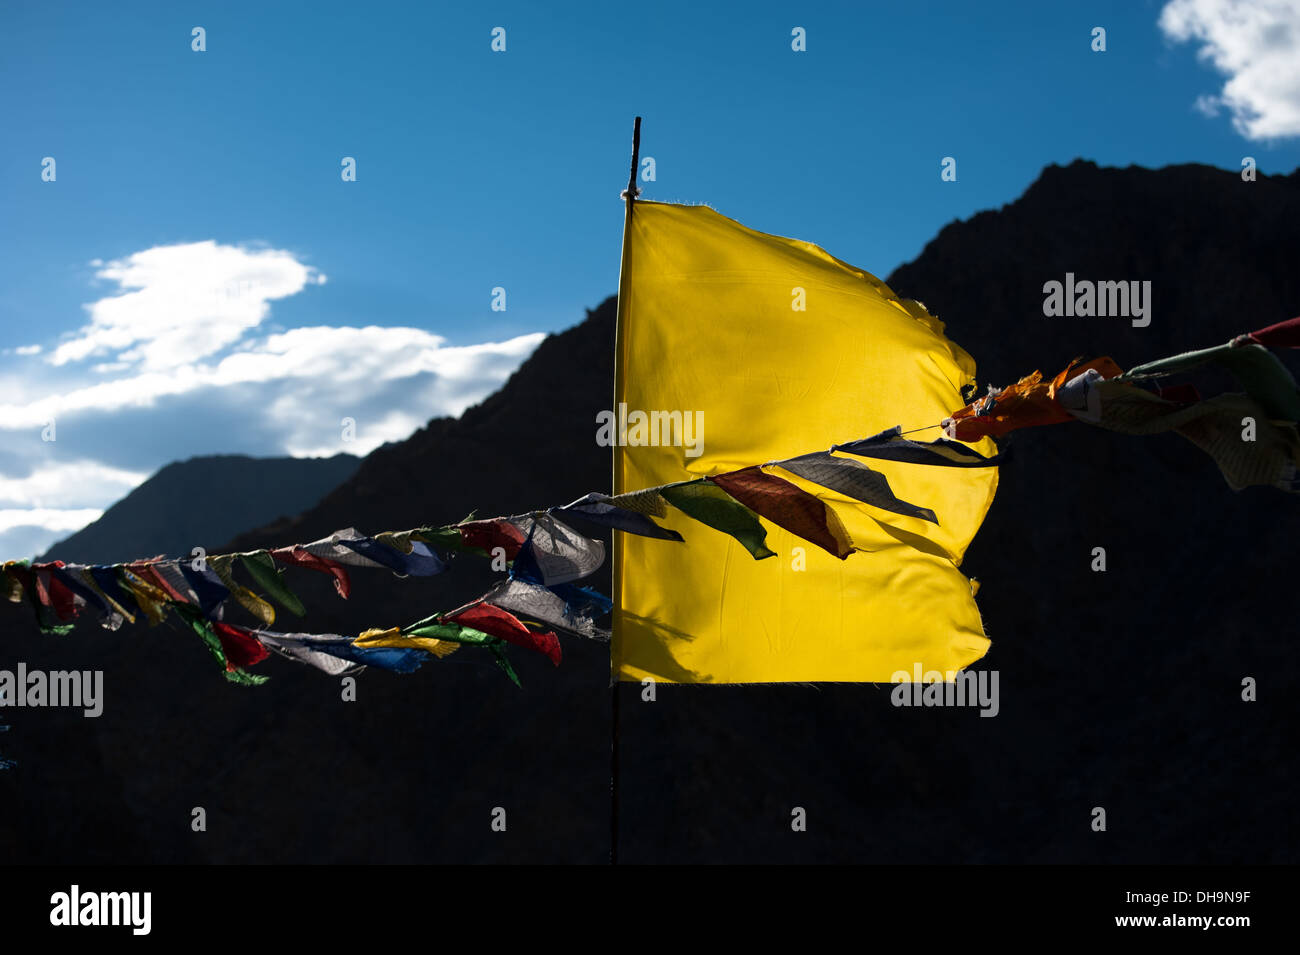 Buddhist praying flags flapping in wind over Himalaya mountains landscape and blue sunset sky India Ladakh Leh altitude 3300 m Stock Photo